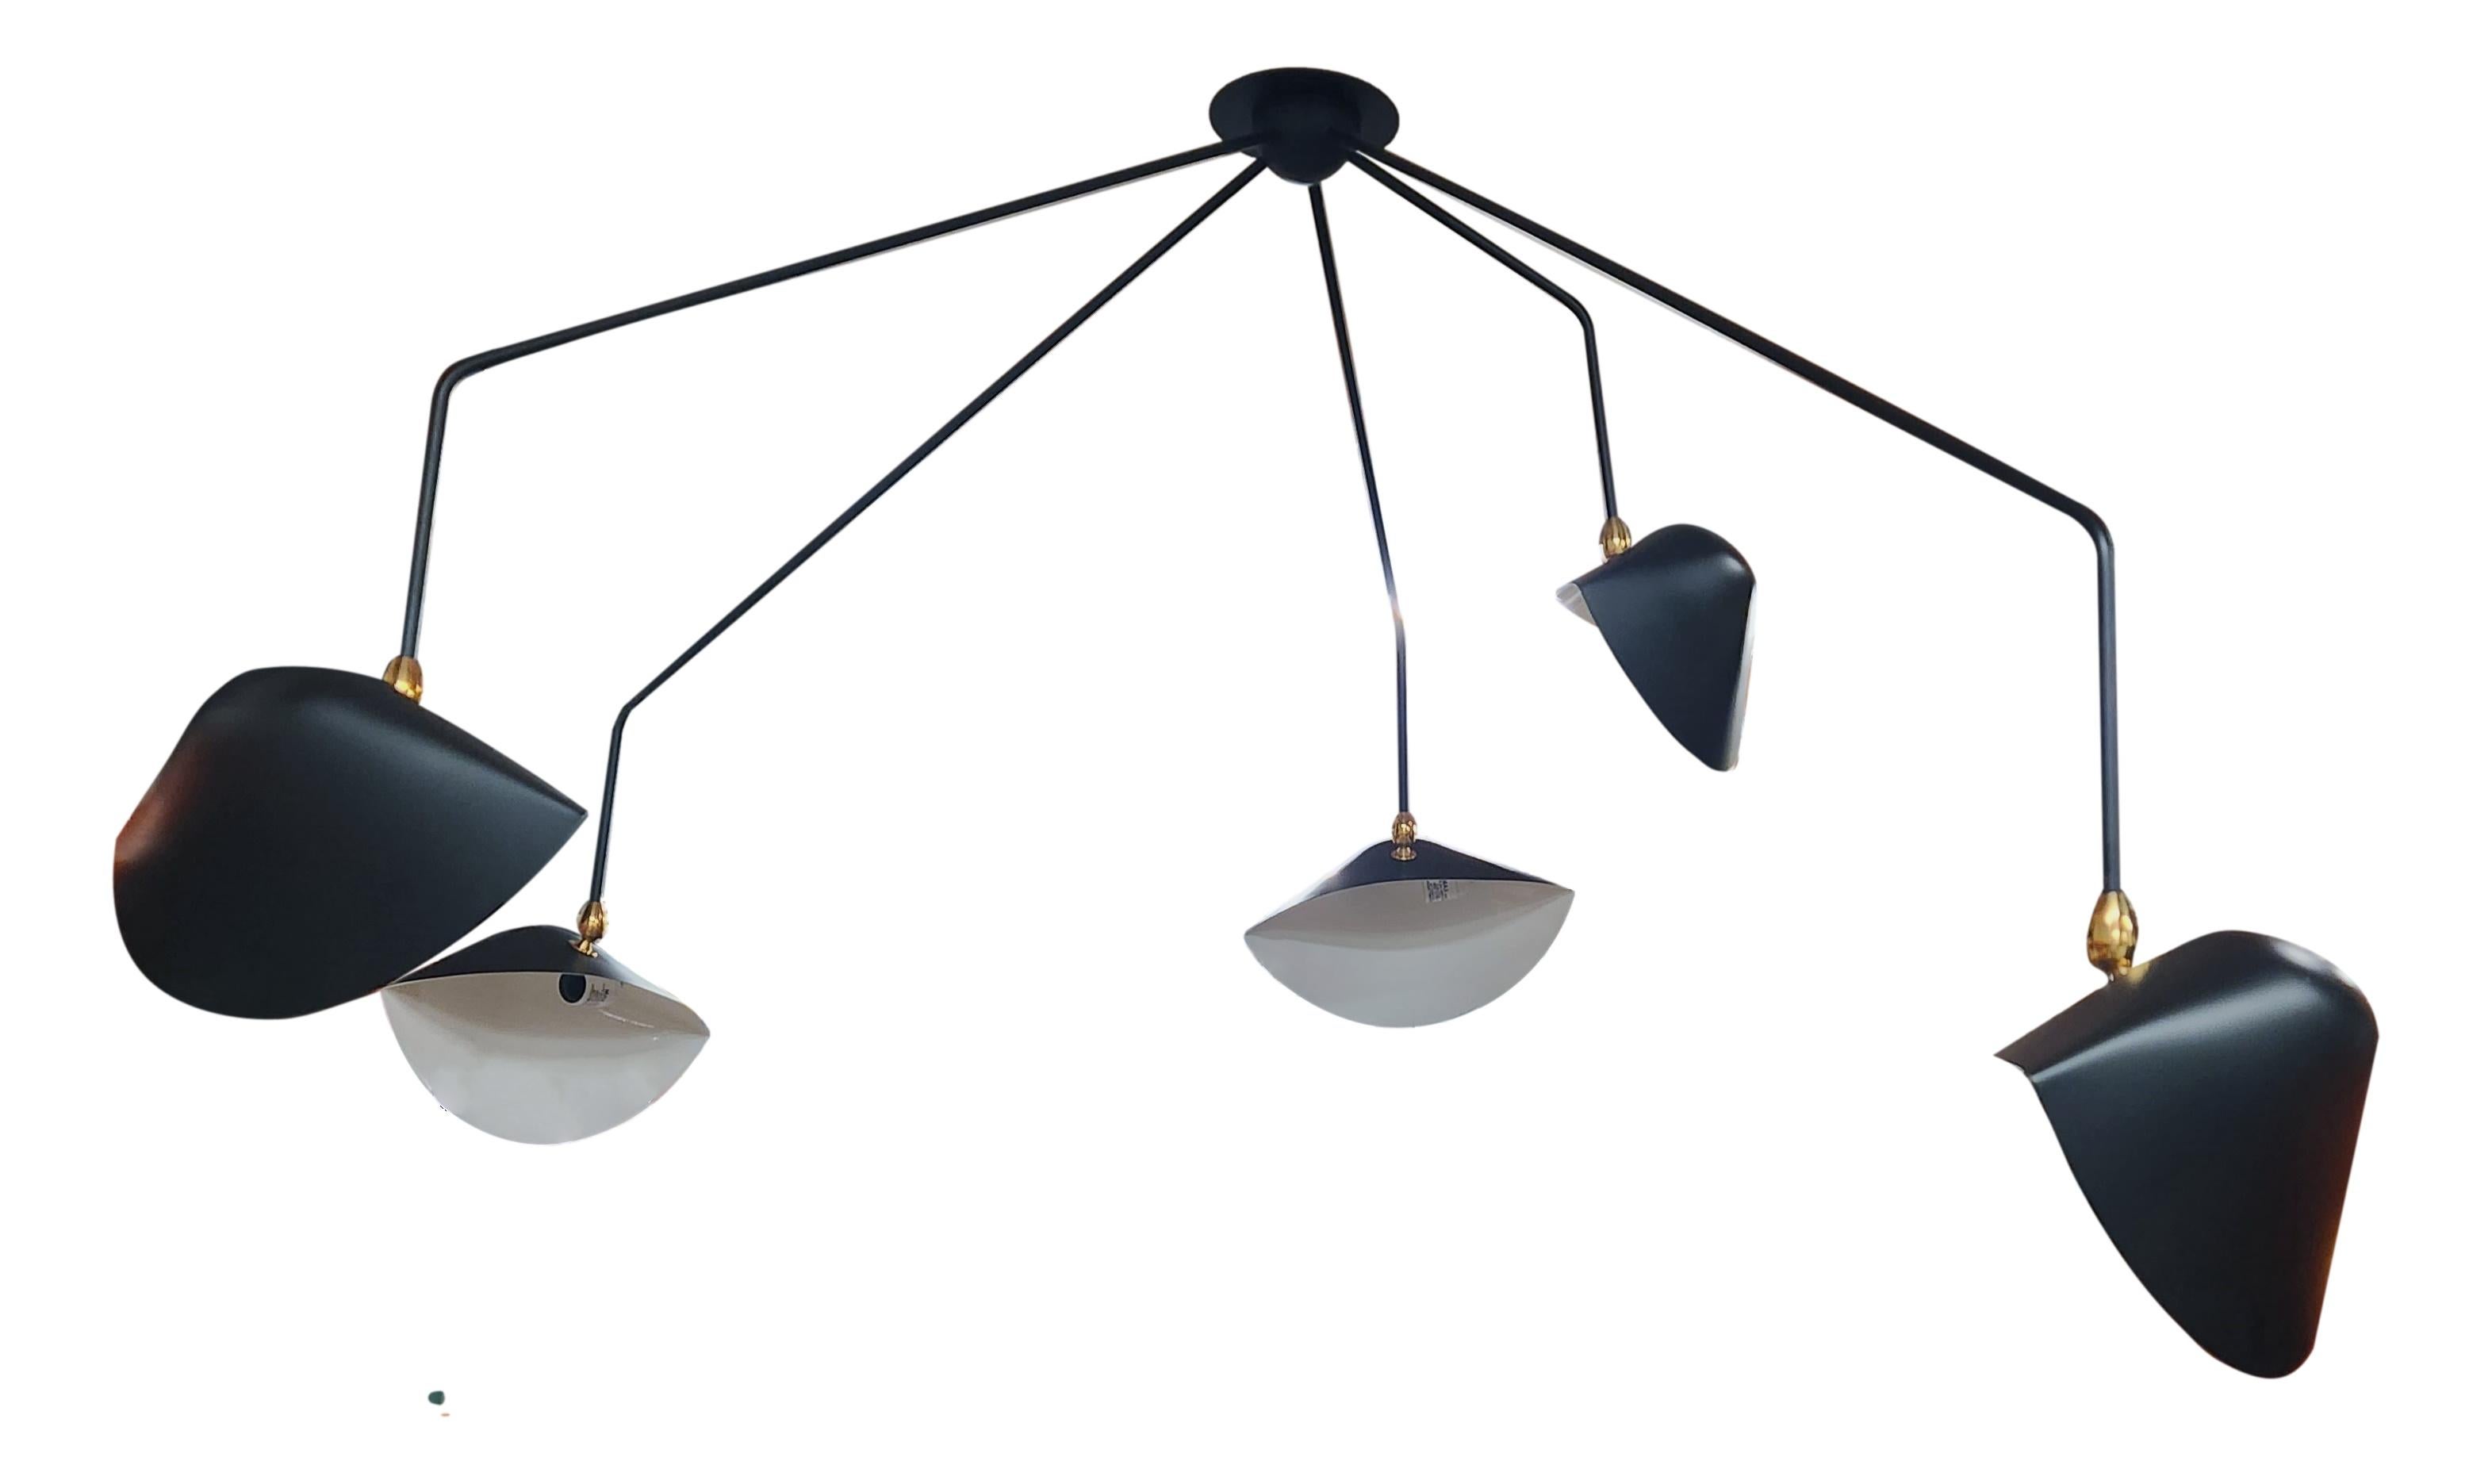 Metal Serge Mouille - Spider Ceiling Lamp 5 Falling Arms in Black 39